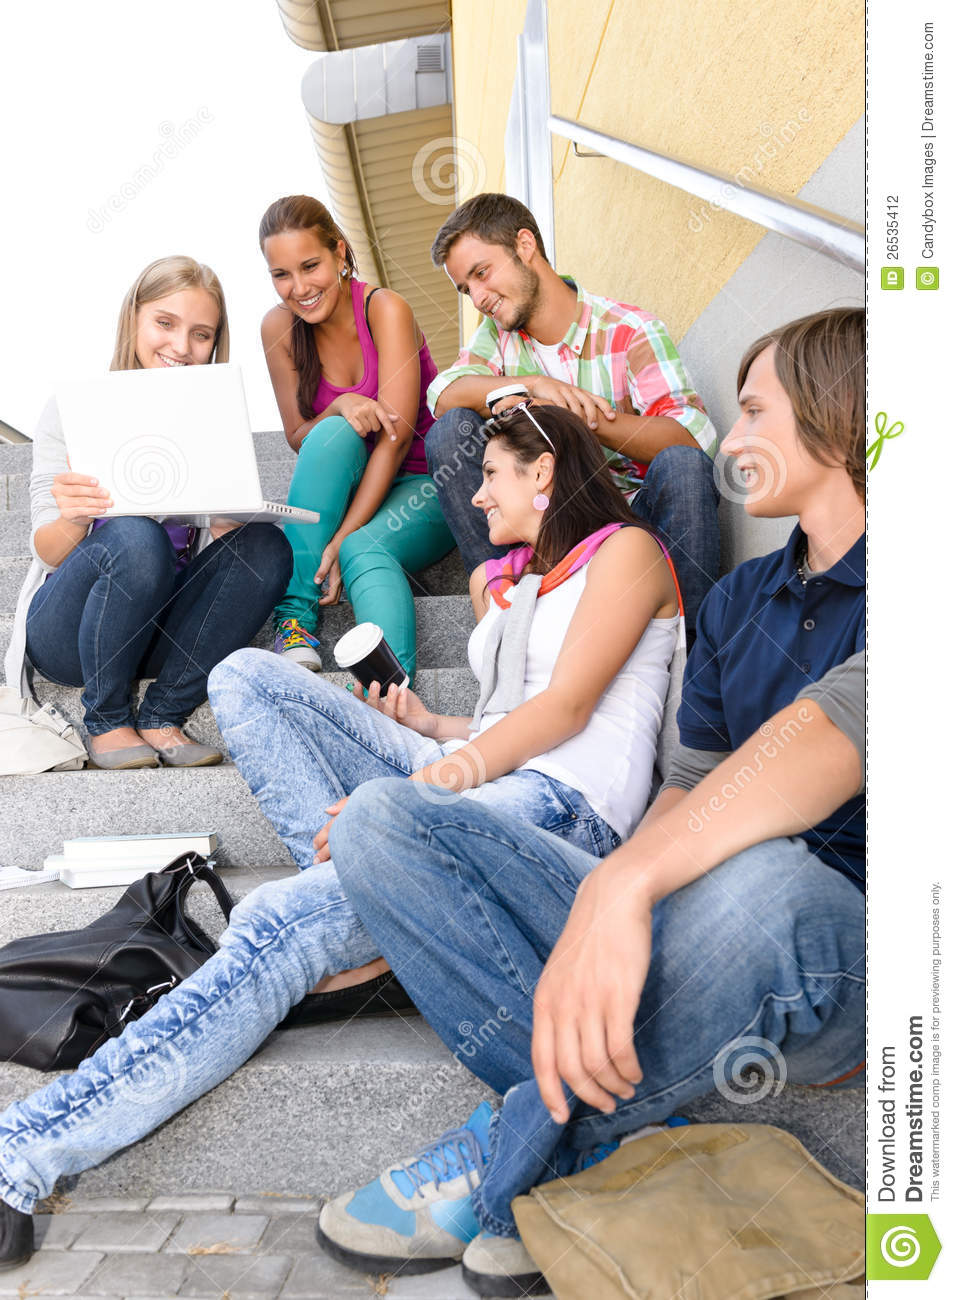 Students Having Fun With Laptop School Stairs Teens College Laughing